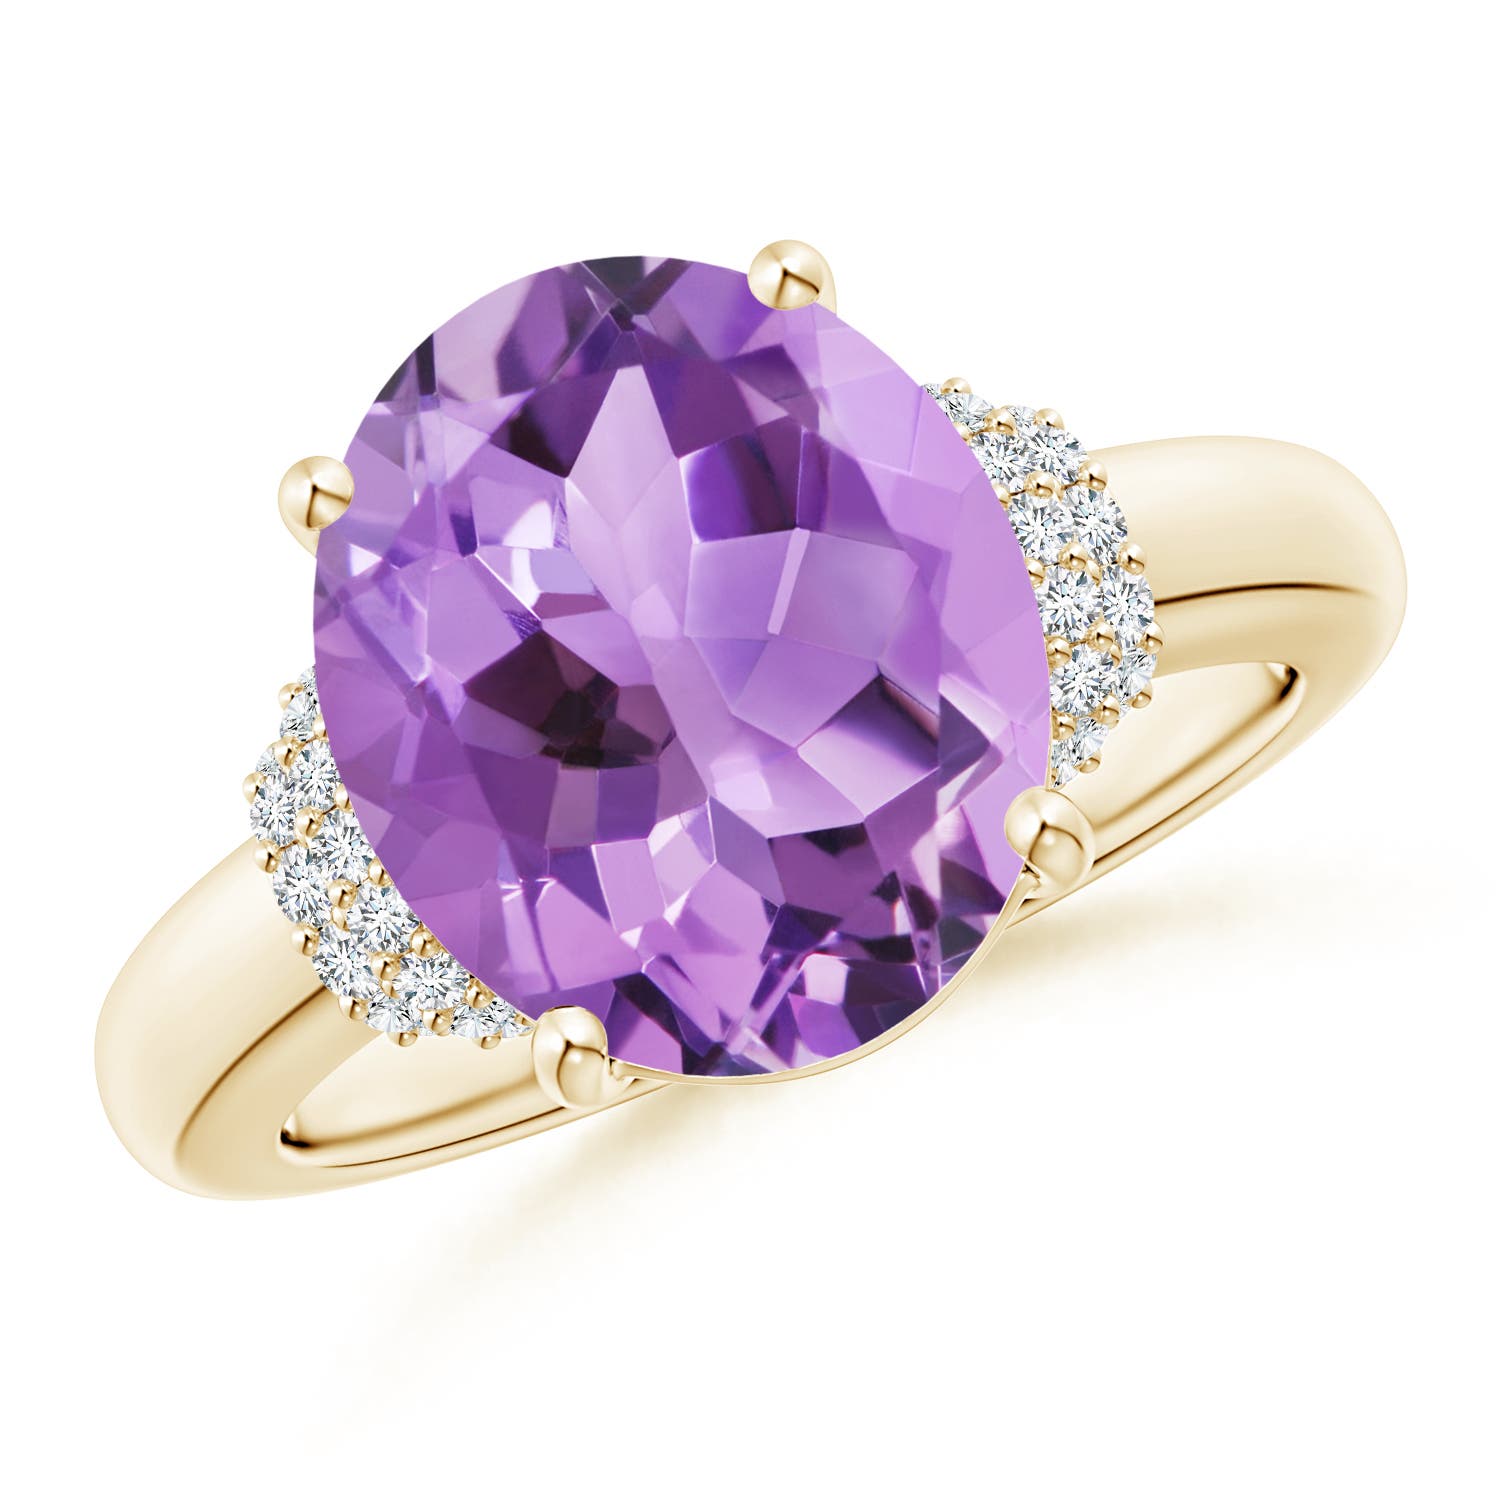 A - Amethyst / 4.54 CT / 14 KT Yellow Gold